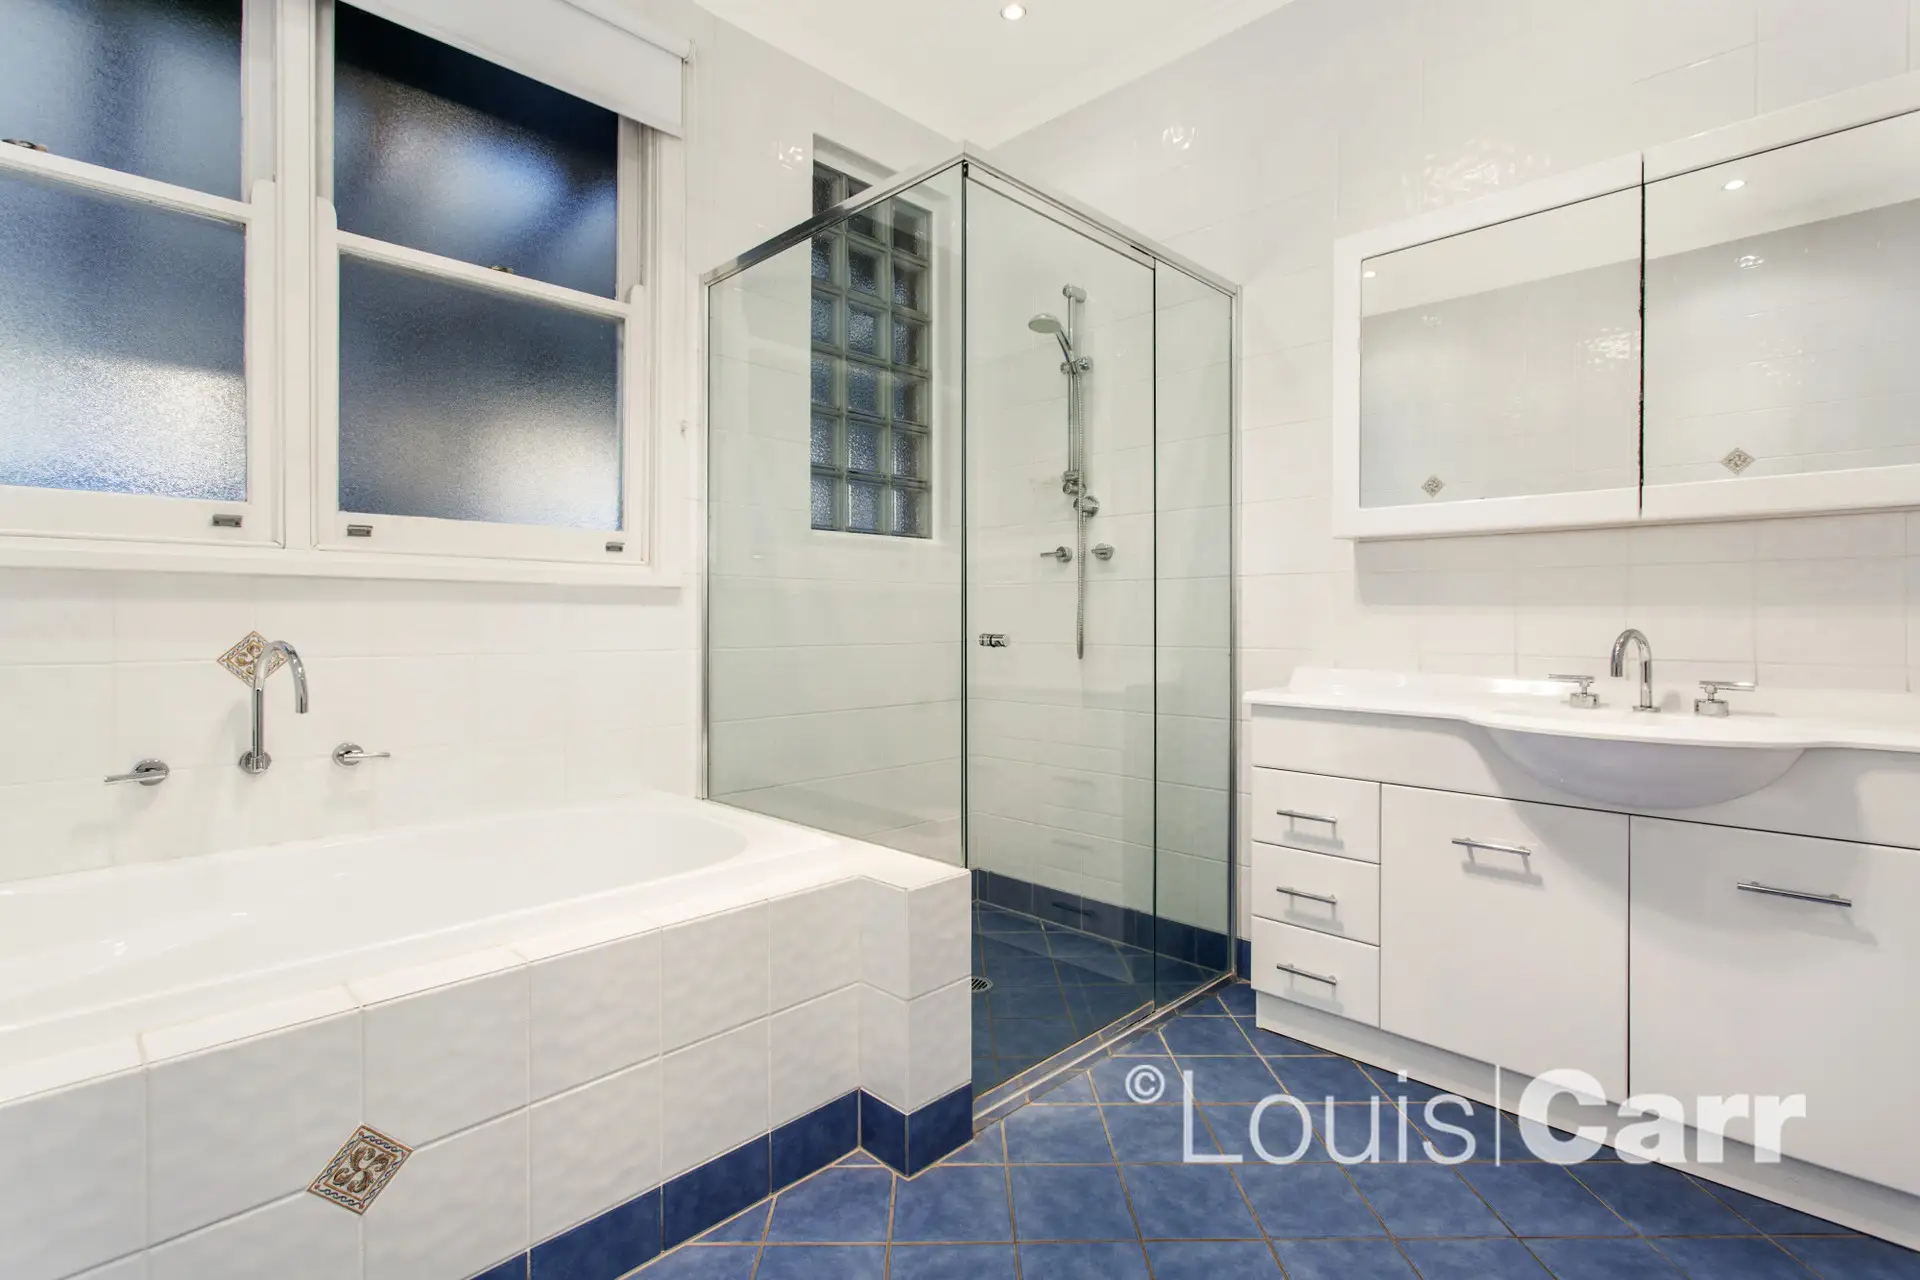 Photo #7: 17 Jadchalm Street, West Pennant Hills - Sold by Louis Carr Real Estate